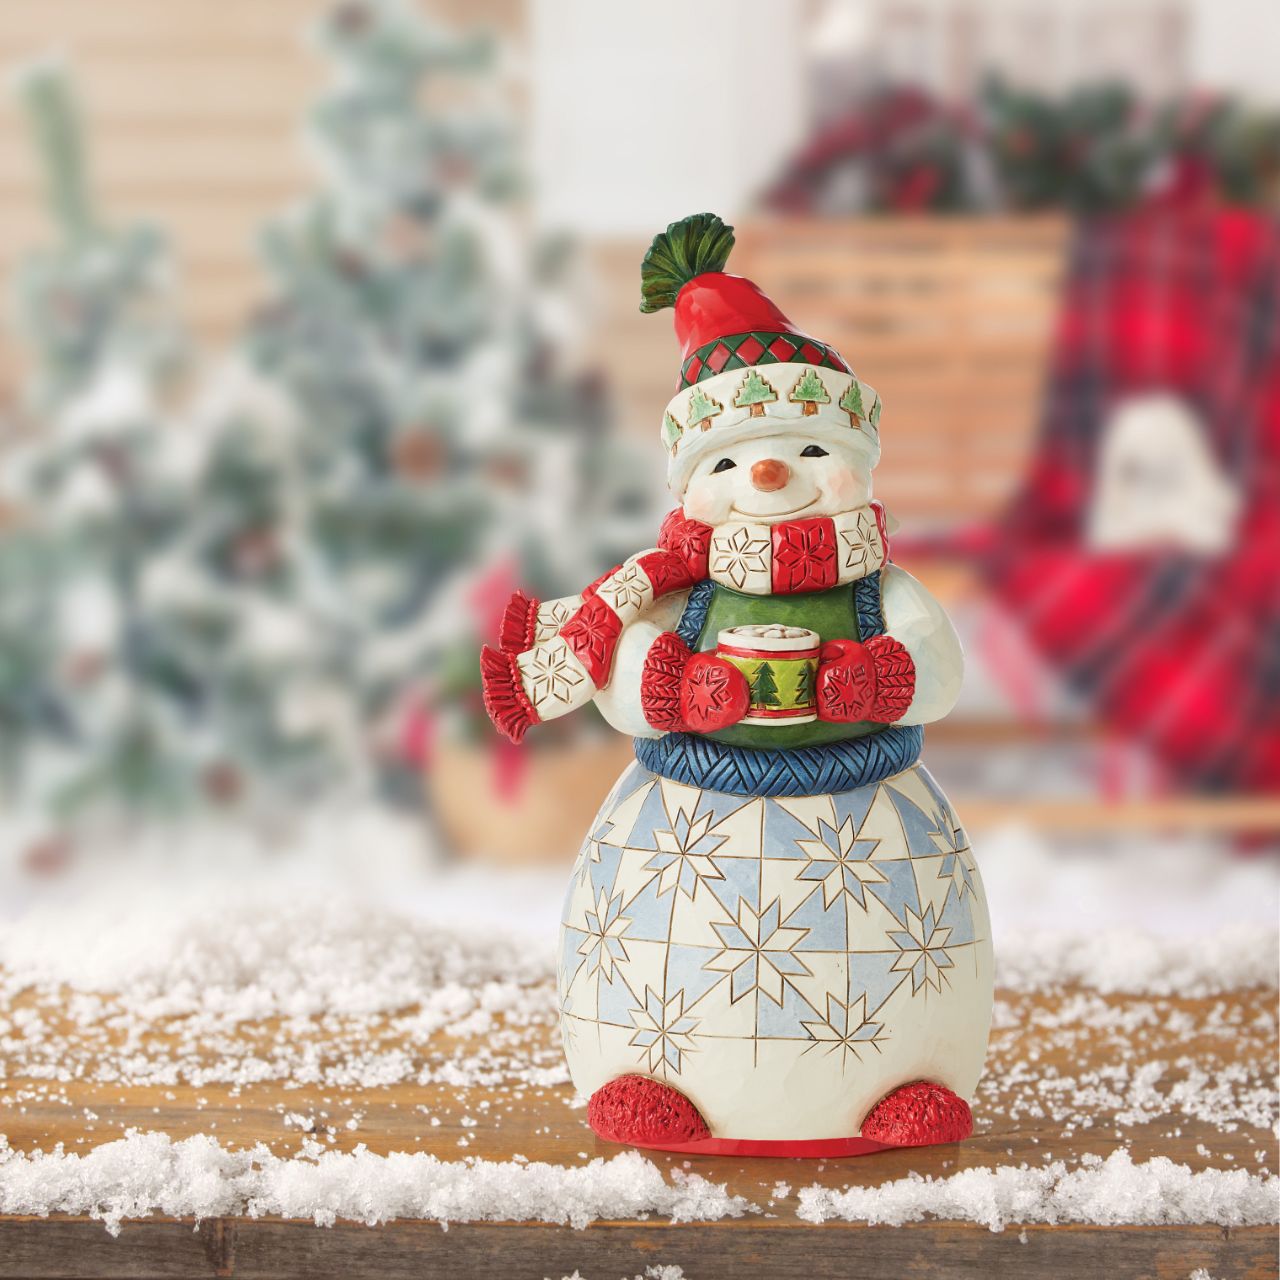 Jim Shore Cozy Snowman Figurine  Brightly Dressed in his warm winter wear this 2022 Hallmark Exclusive snowman enjoys a delicious steaming cup of cocoa with marshmallows on top to shield against the winter chill.